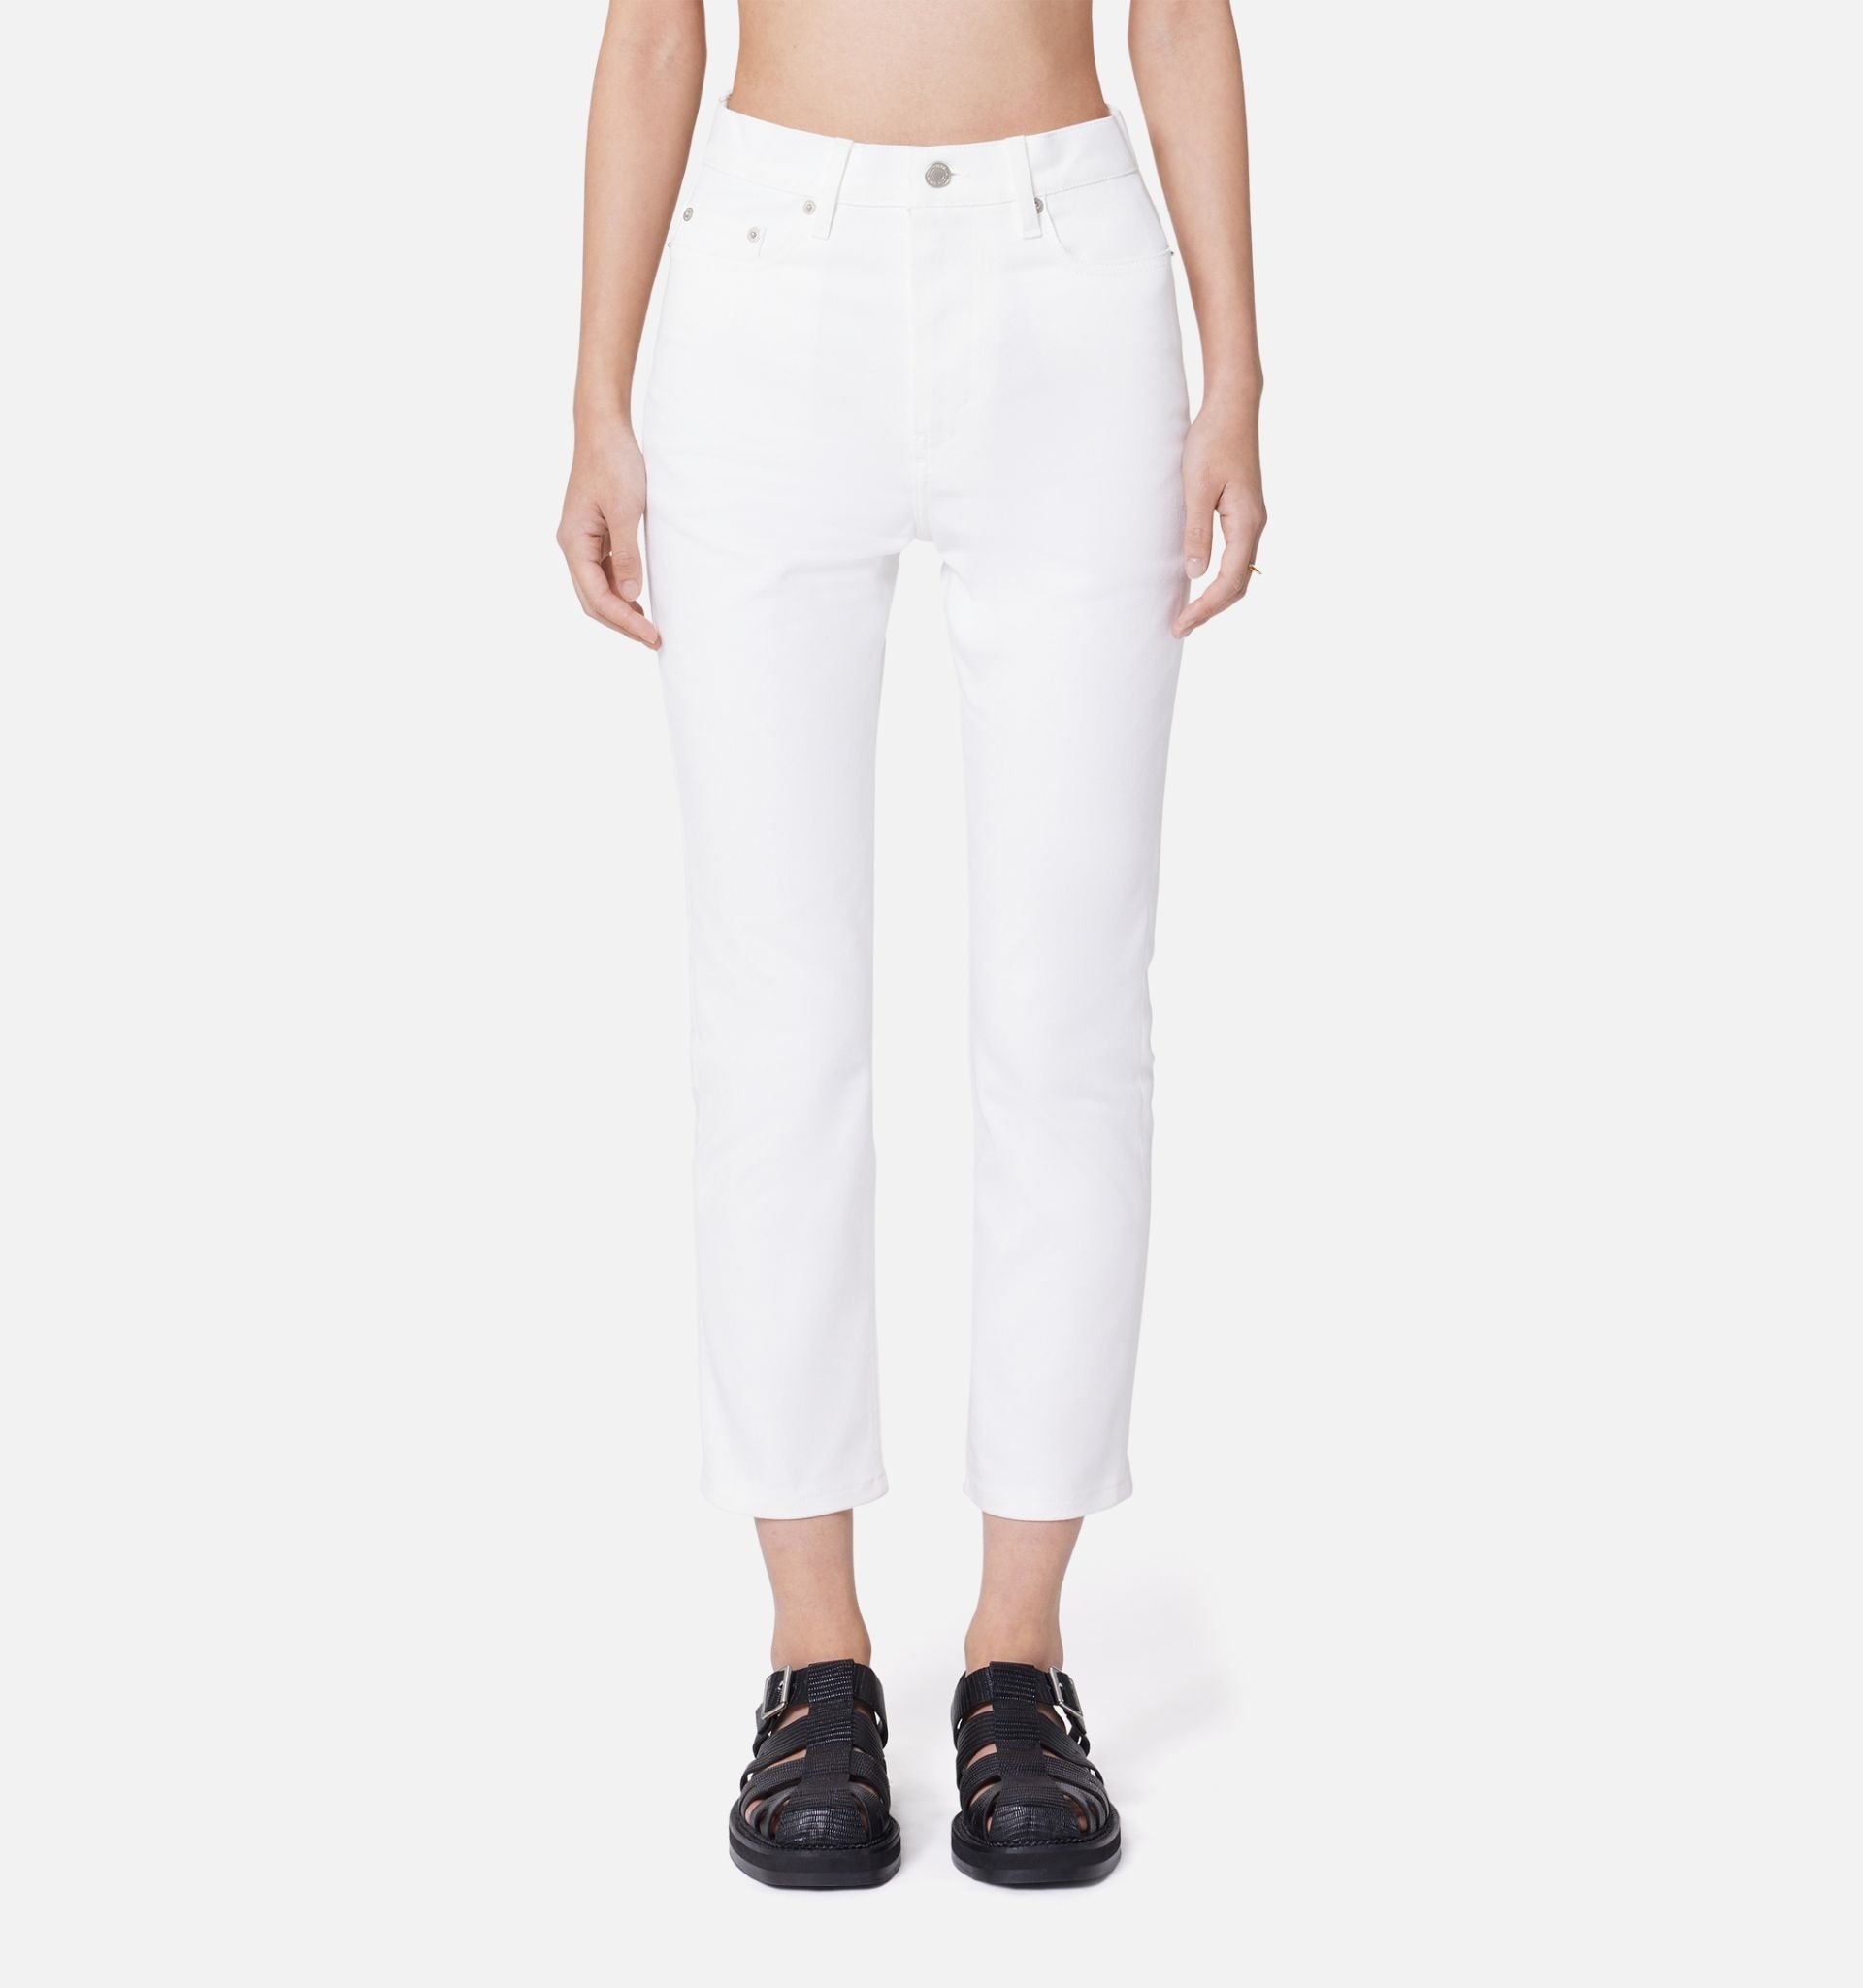 Cropped Slim Fit Trousers - 2